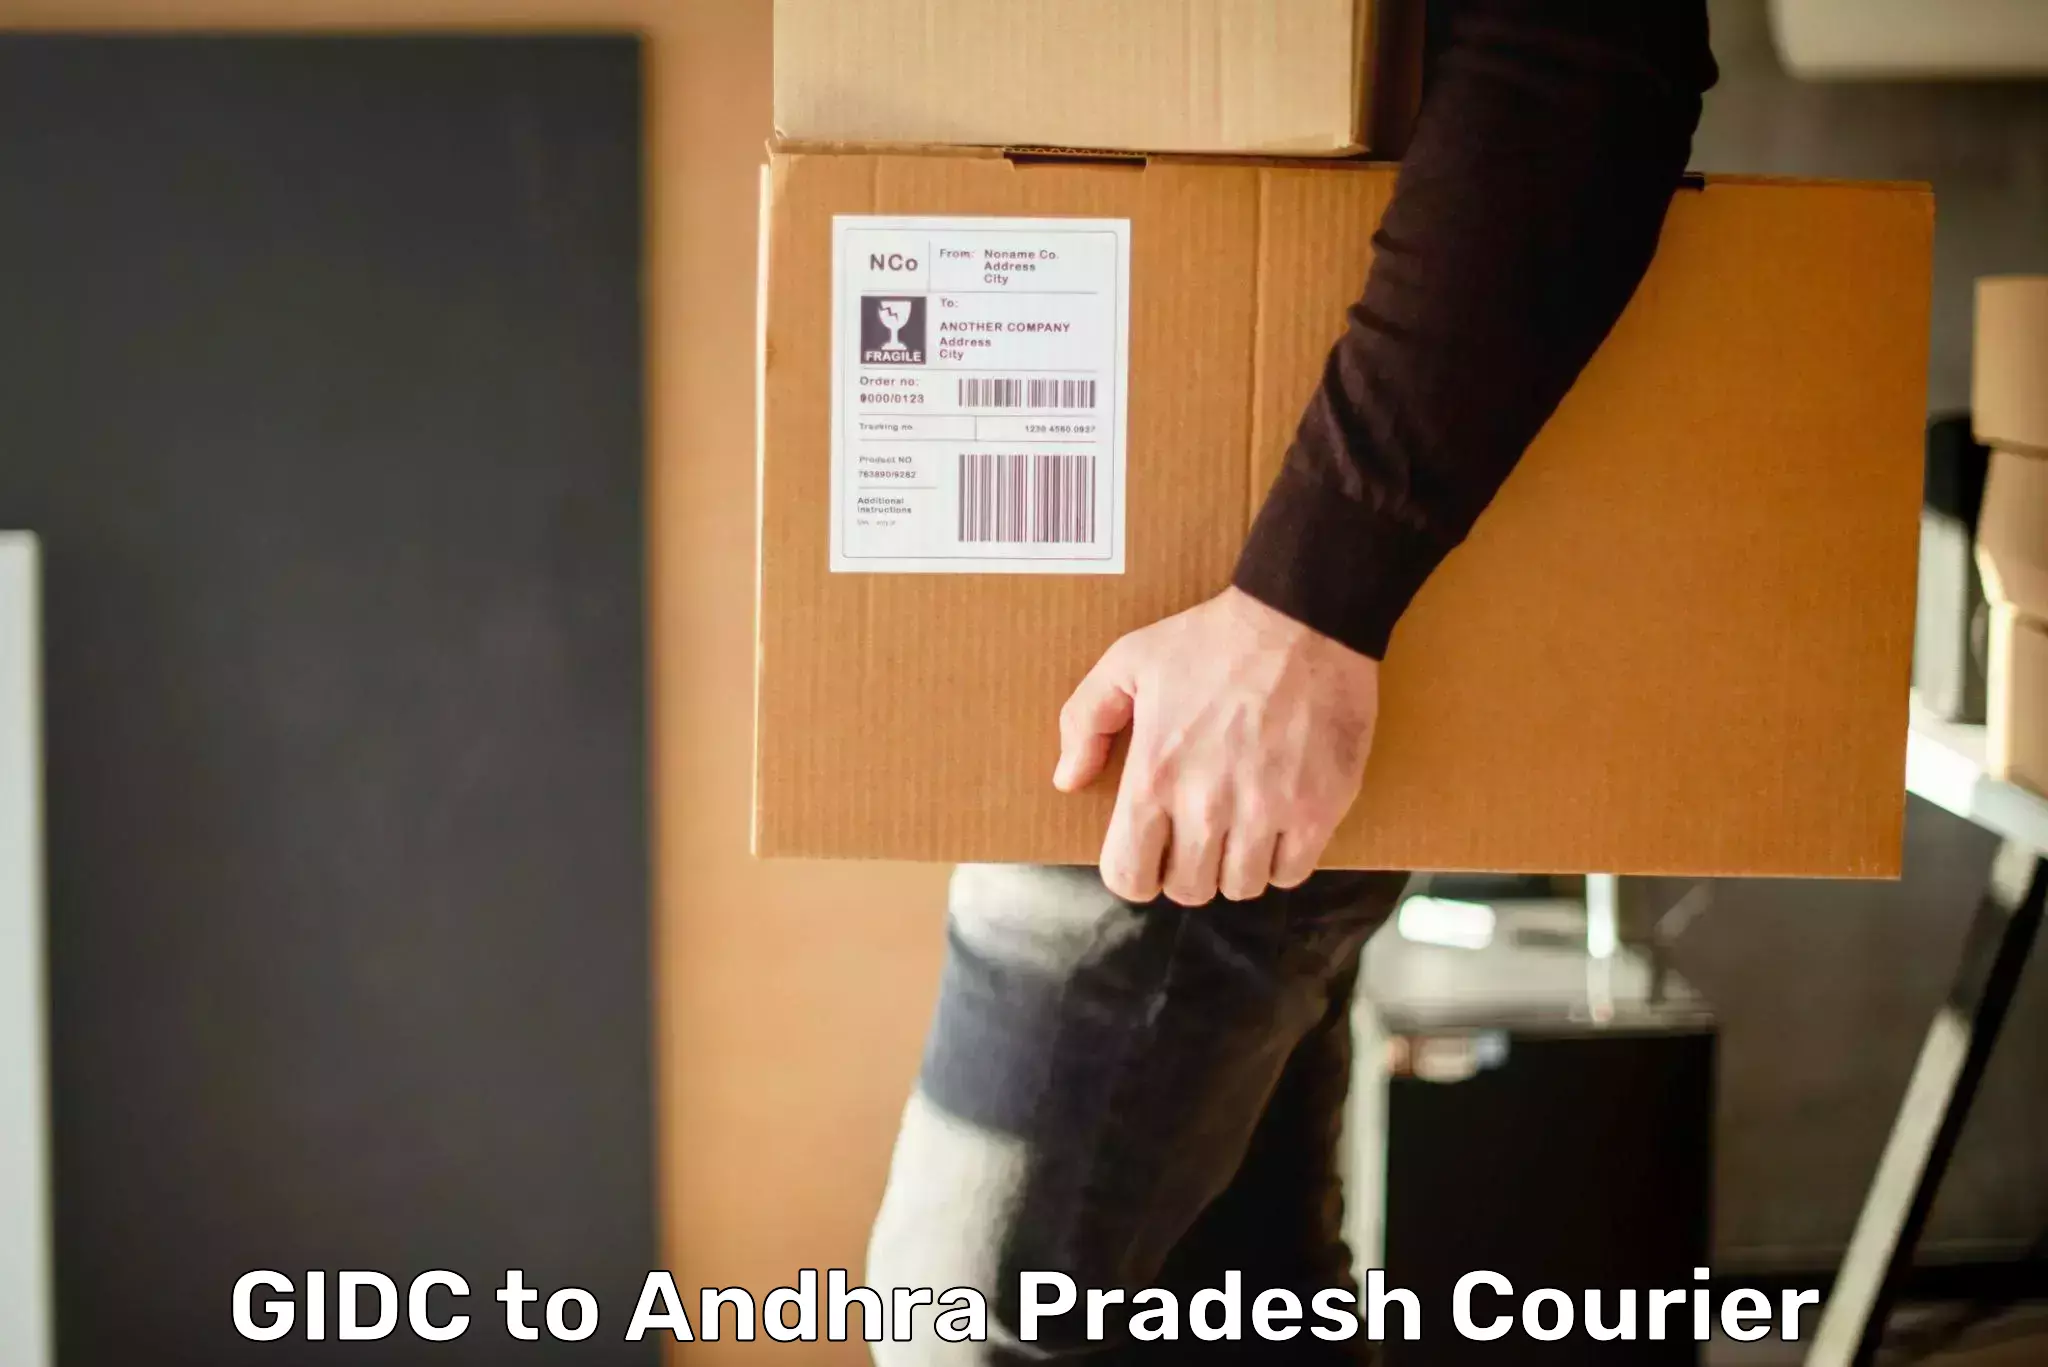 Large package courier GIDC to Tirupati